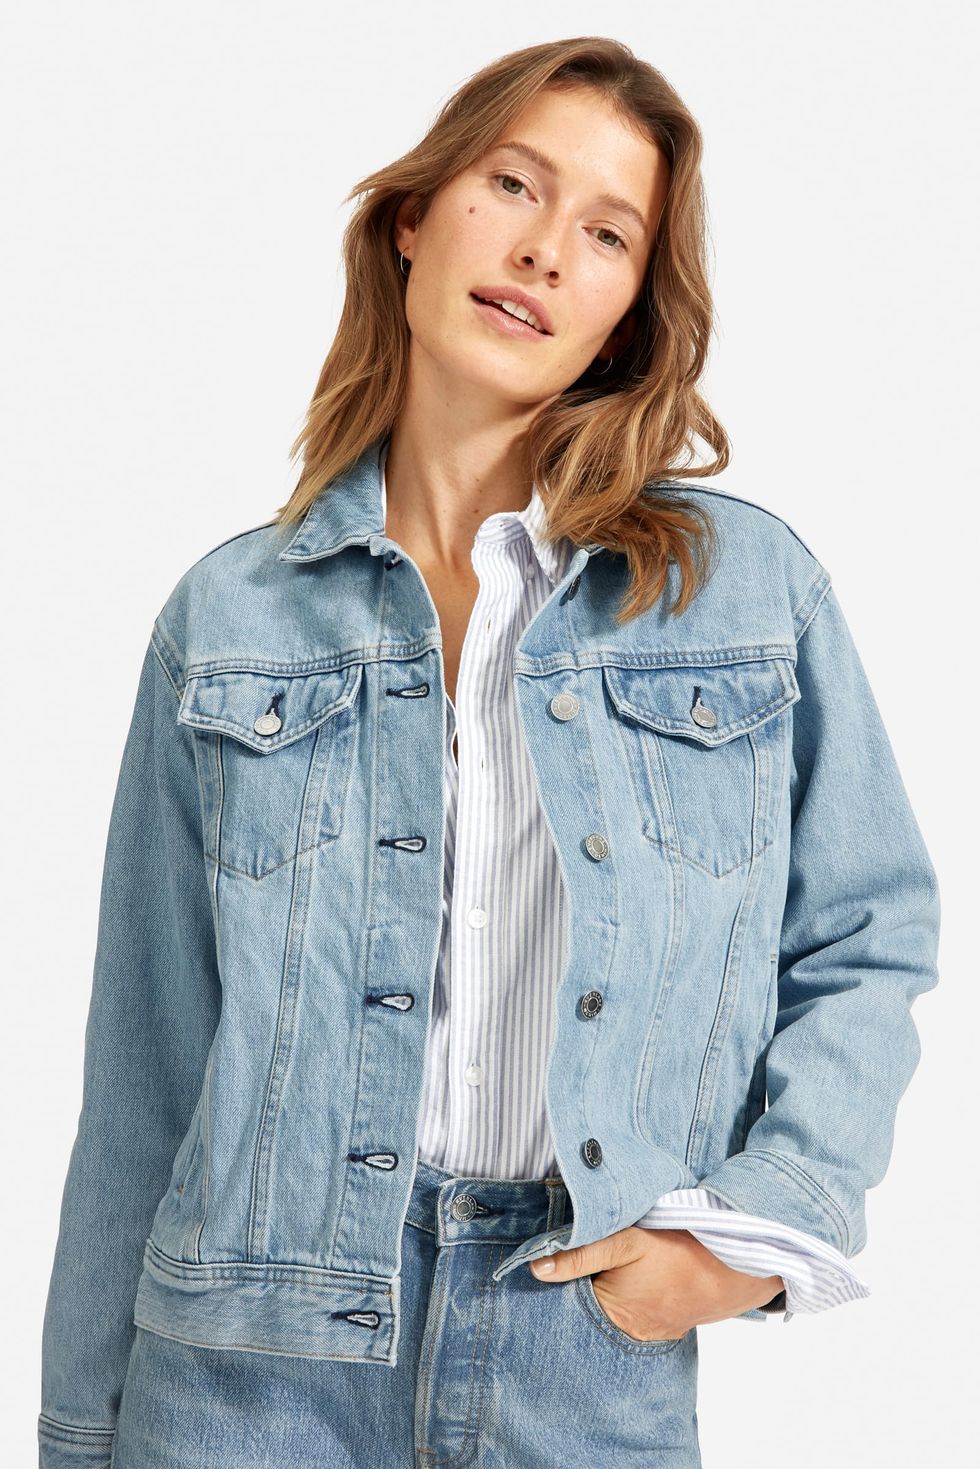 The Denim Jacket in Faded Blue Wash